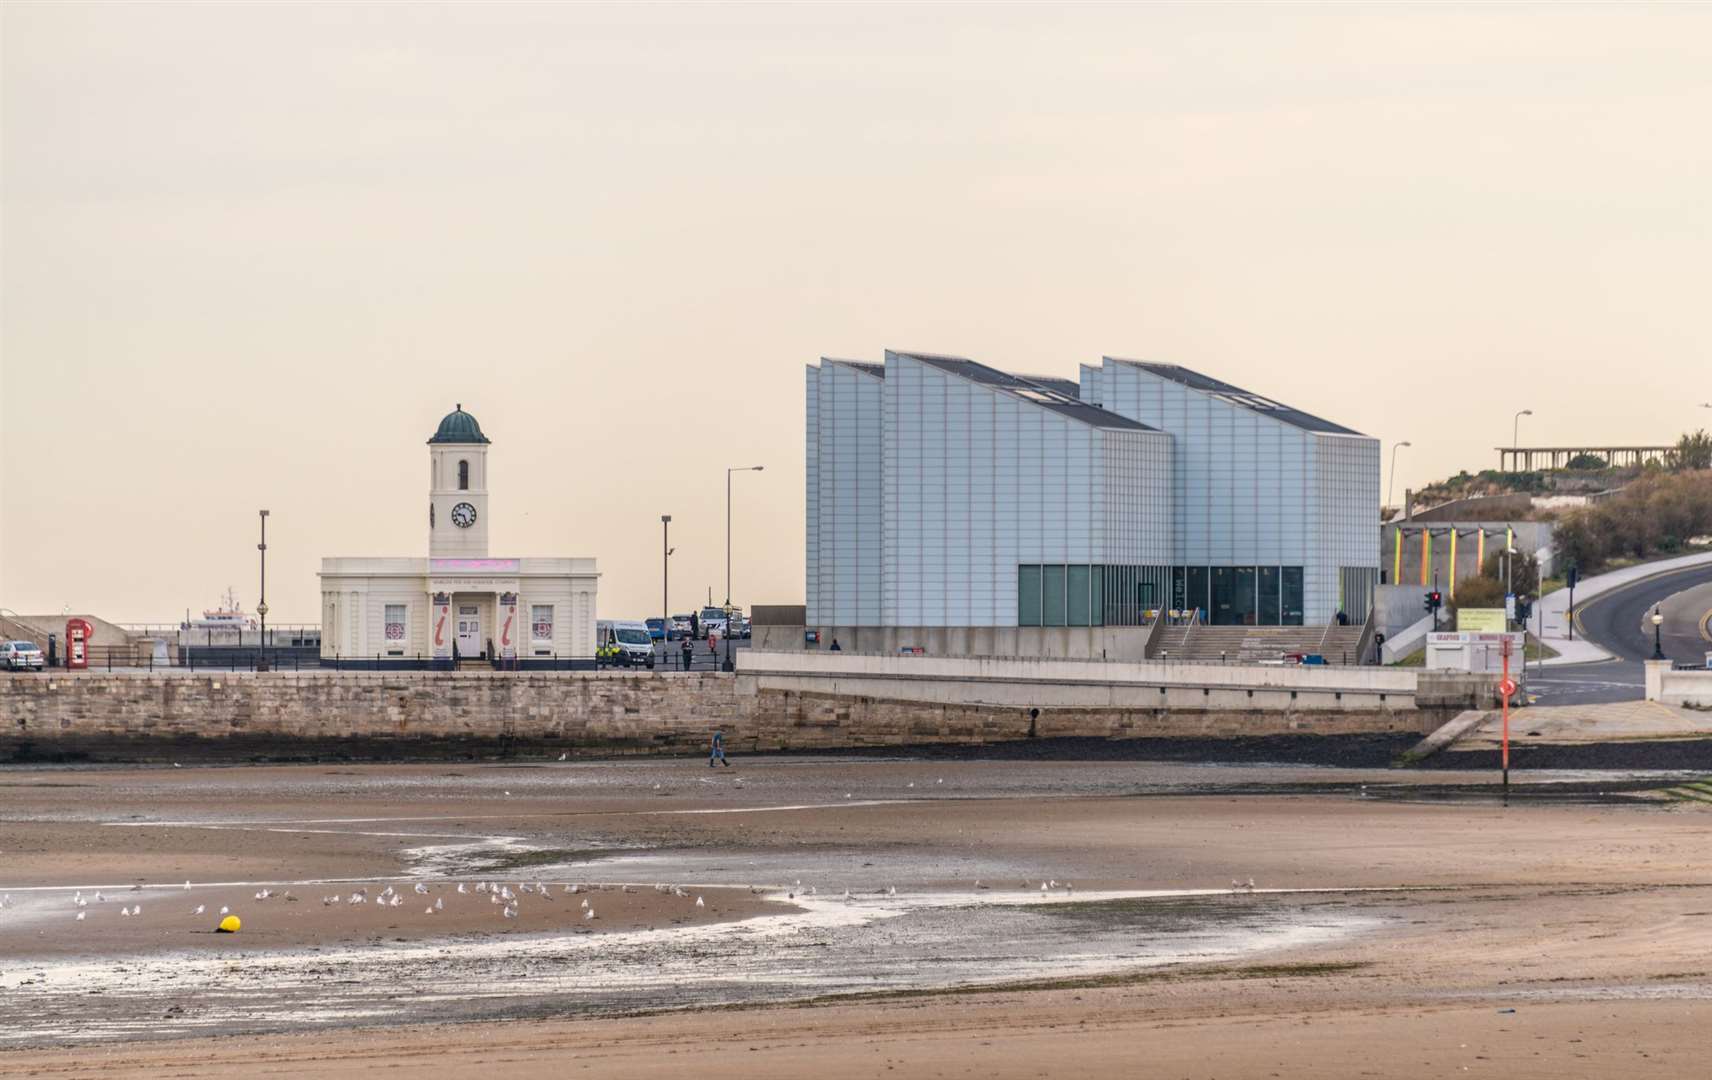 Turner Contemporary in Margate will reopen